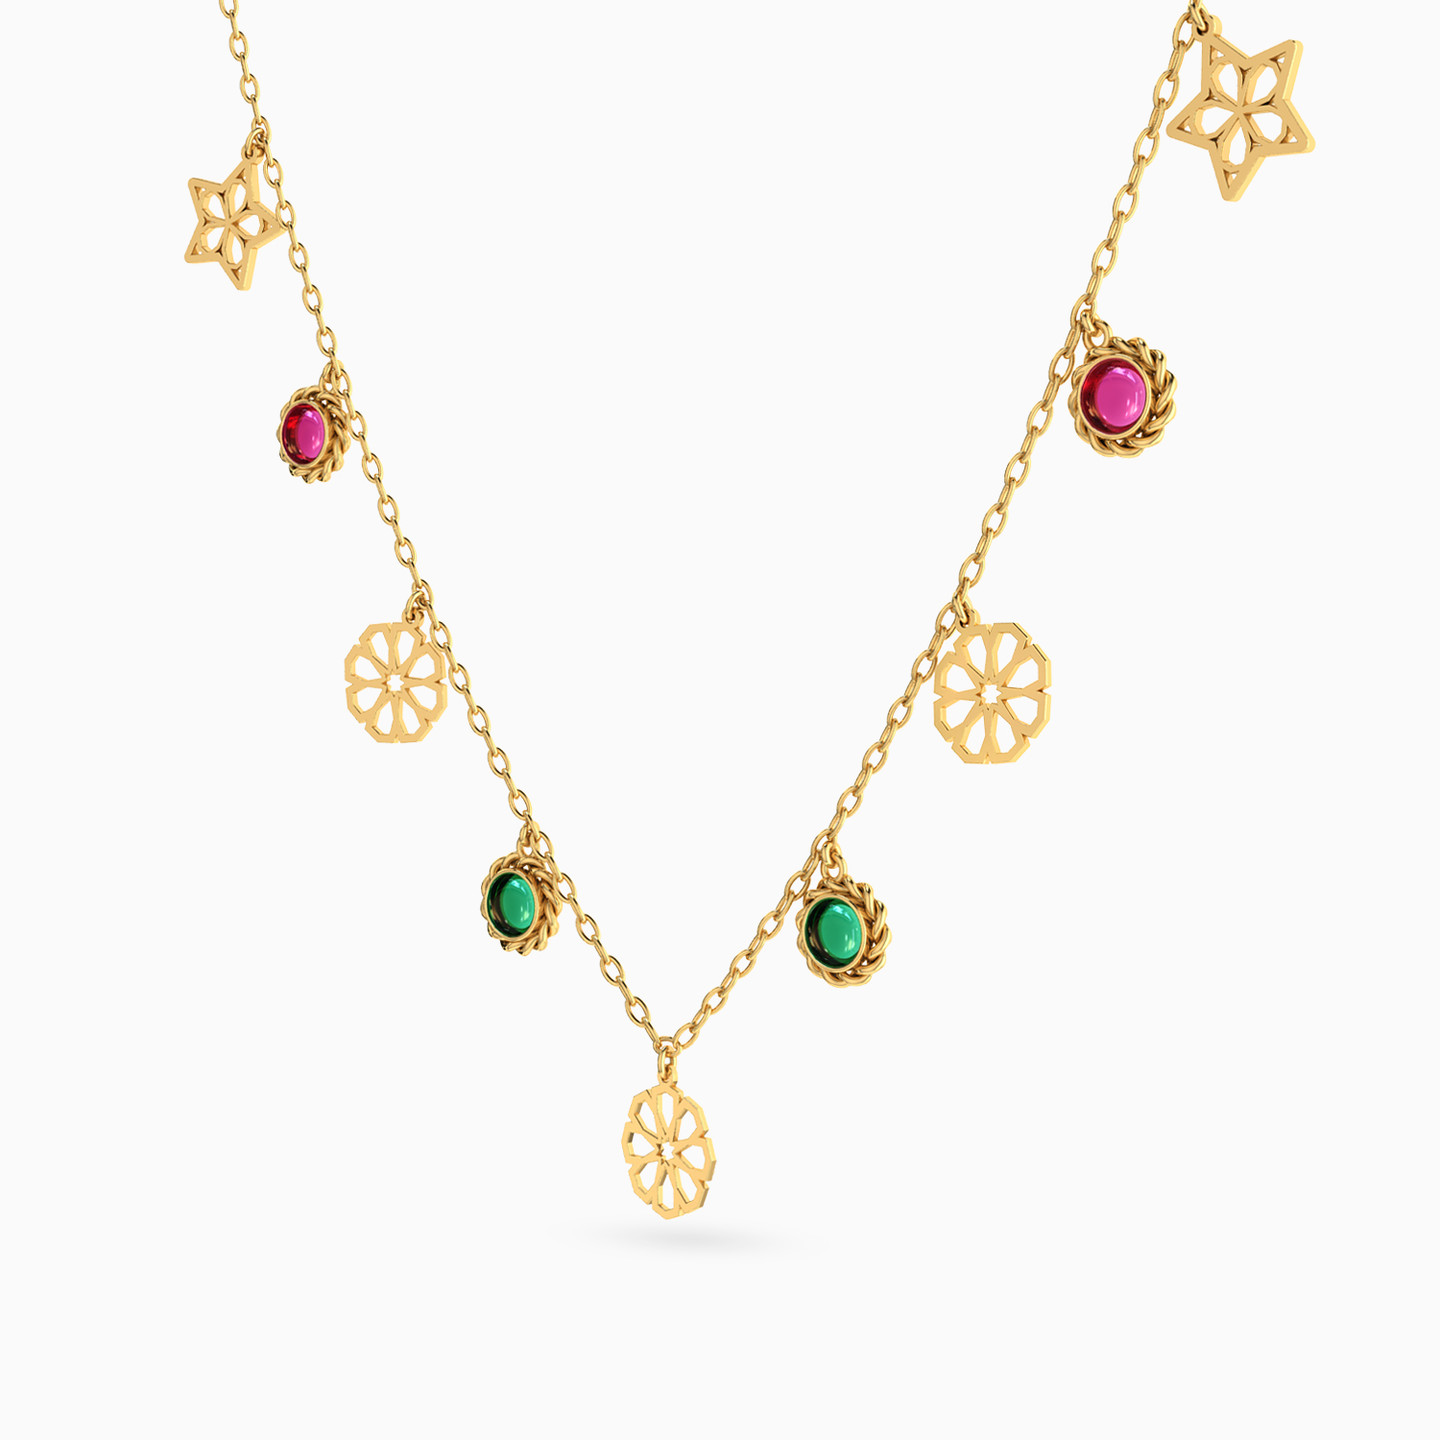 Multi-shaped Colored Stones Charms Necklace with 18K Gold Chain - 2